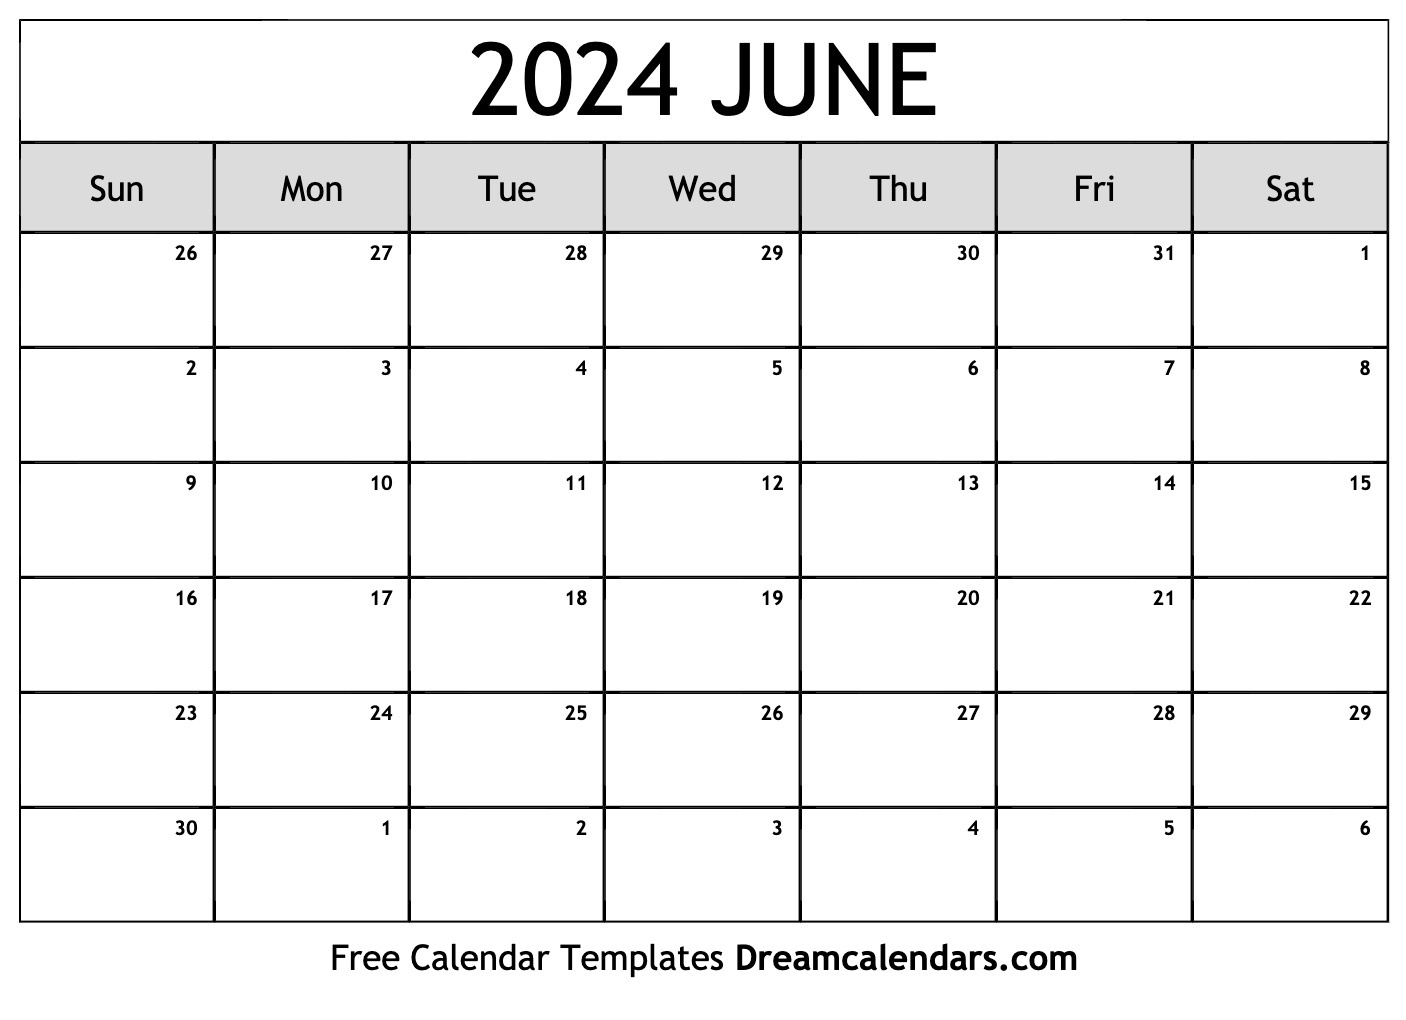 June 2024 Calendar - Free Printable With Holidays And Observances for June 10Th 2024 Calendar